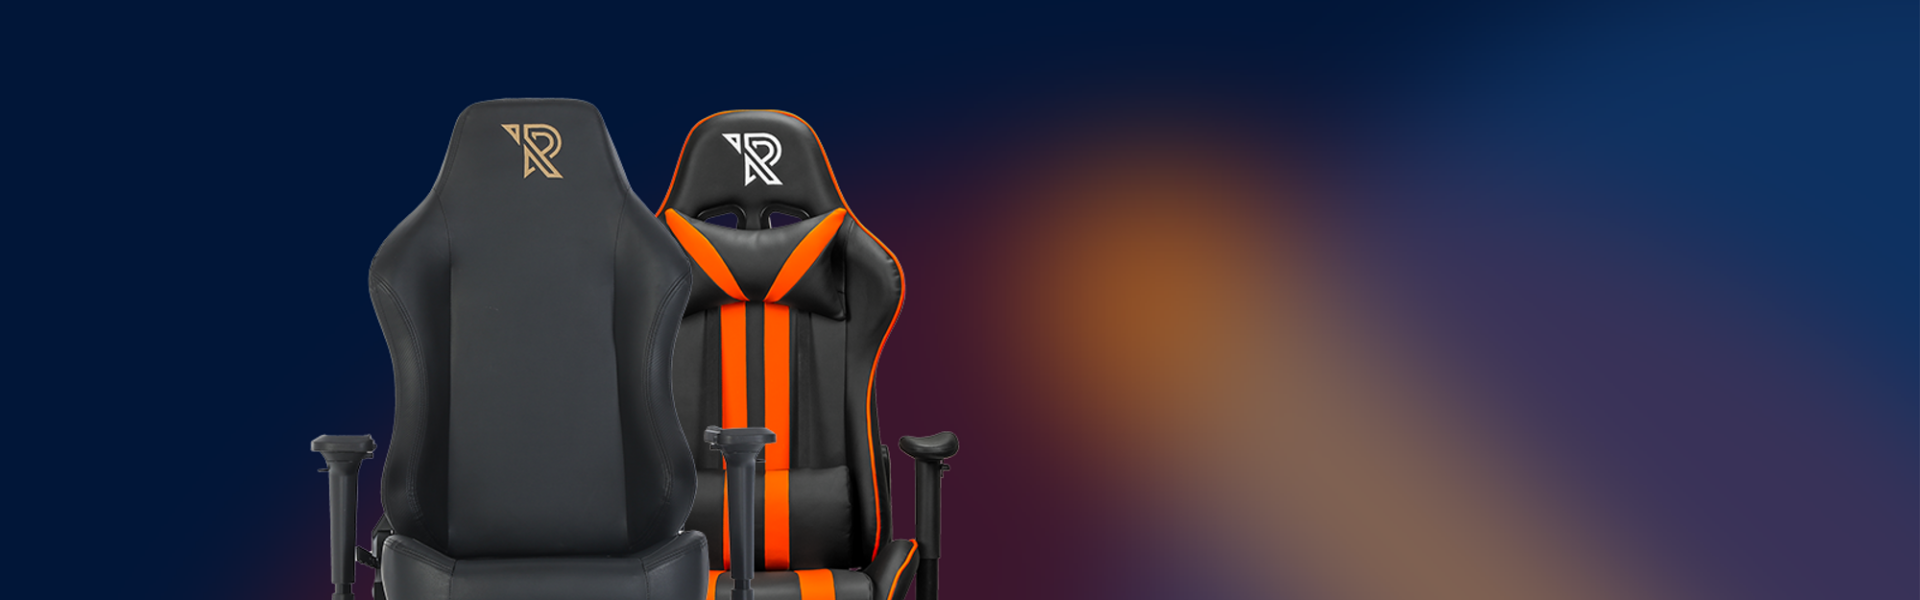 Blog - Gaming Chairs For Tall And Heavy People